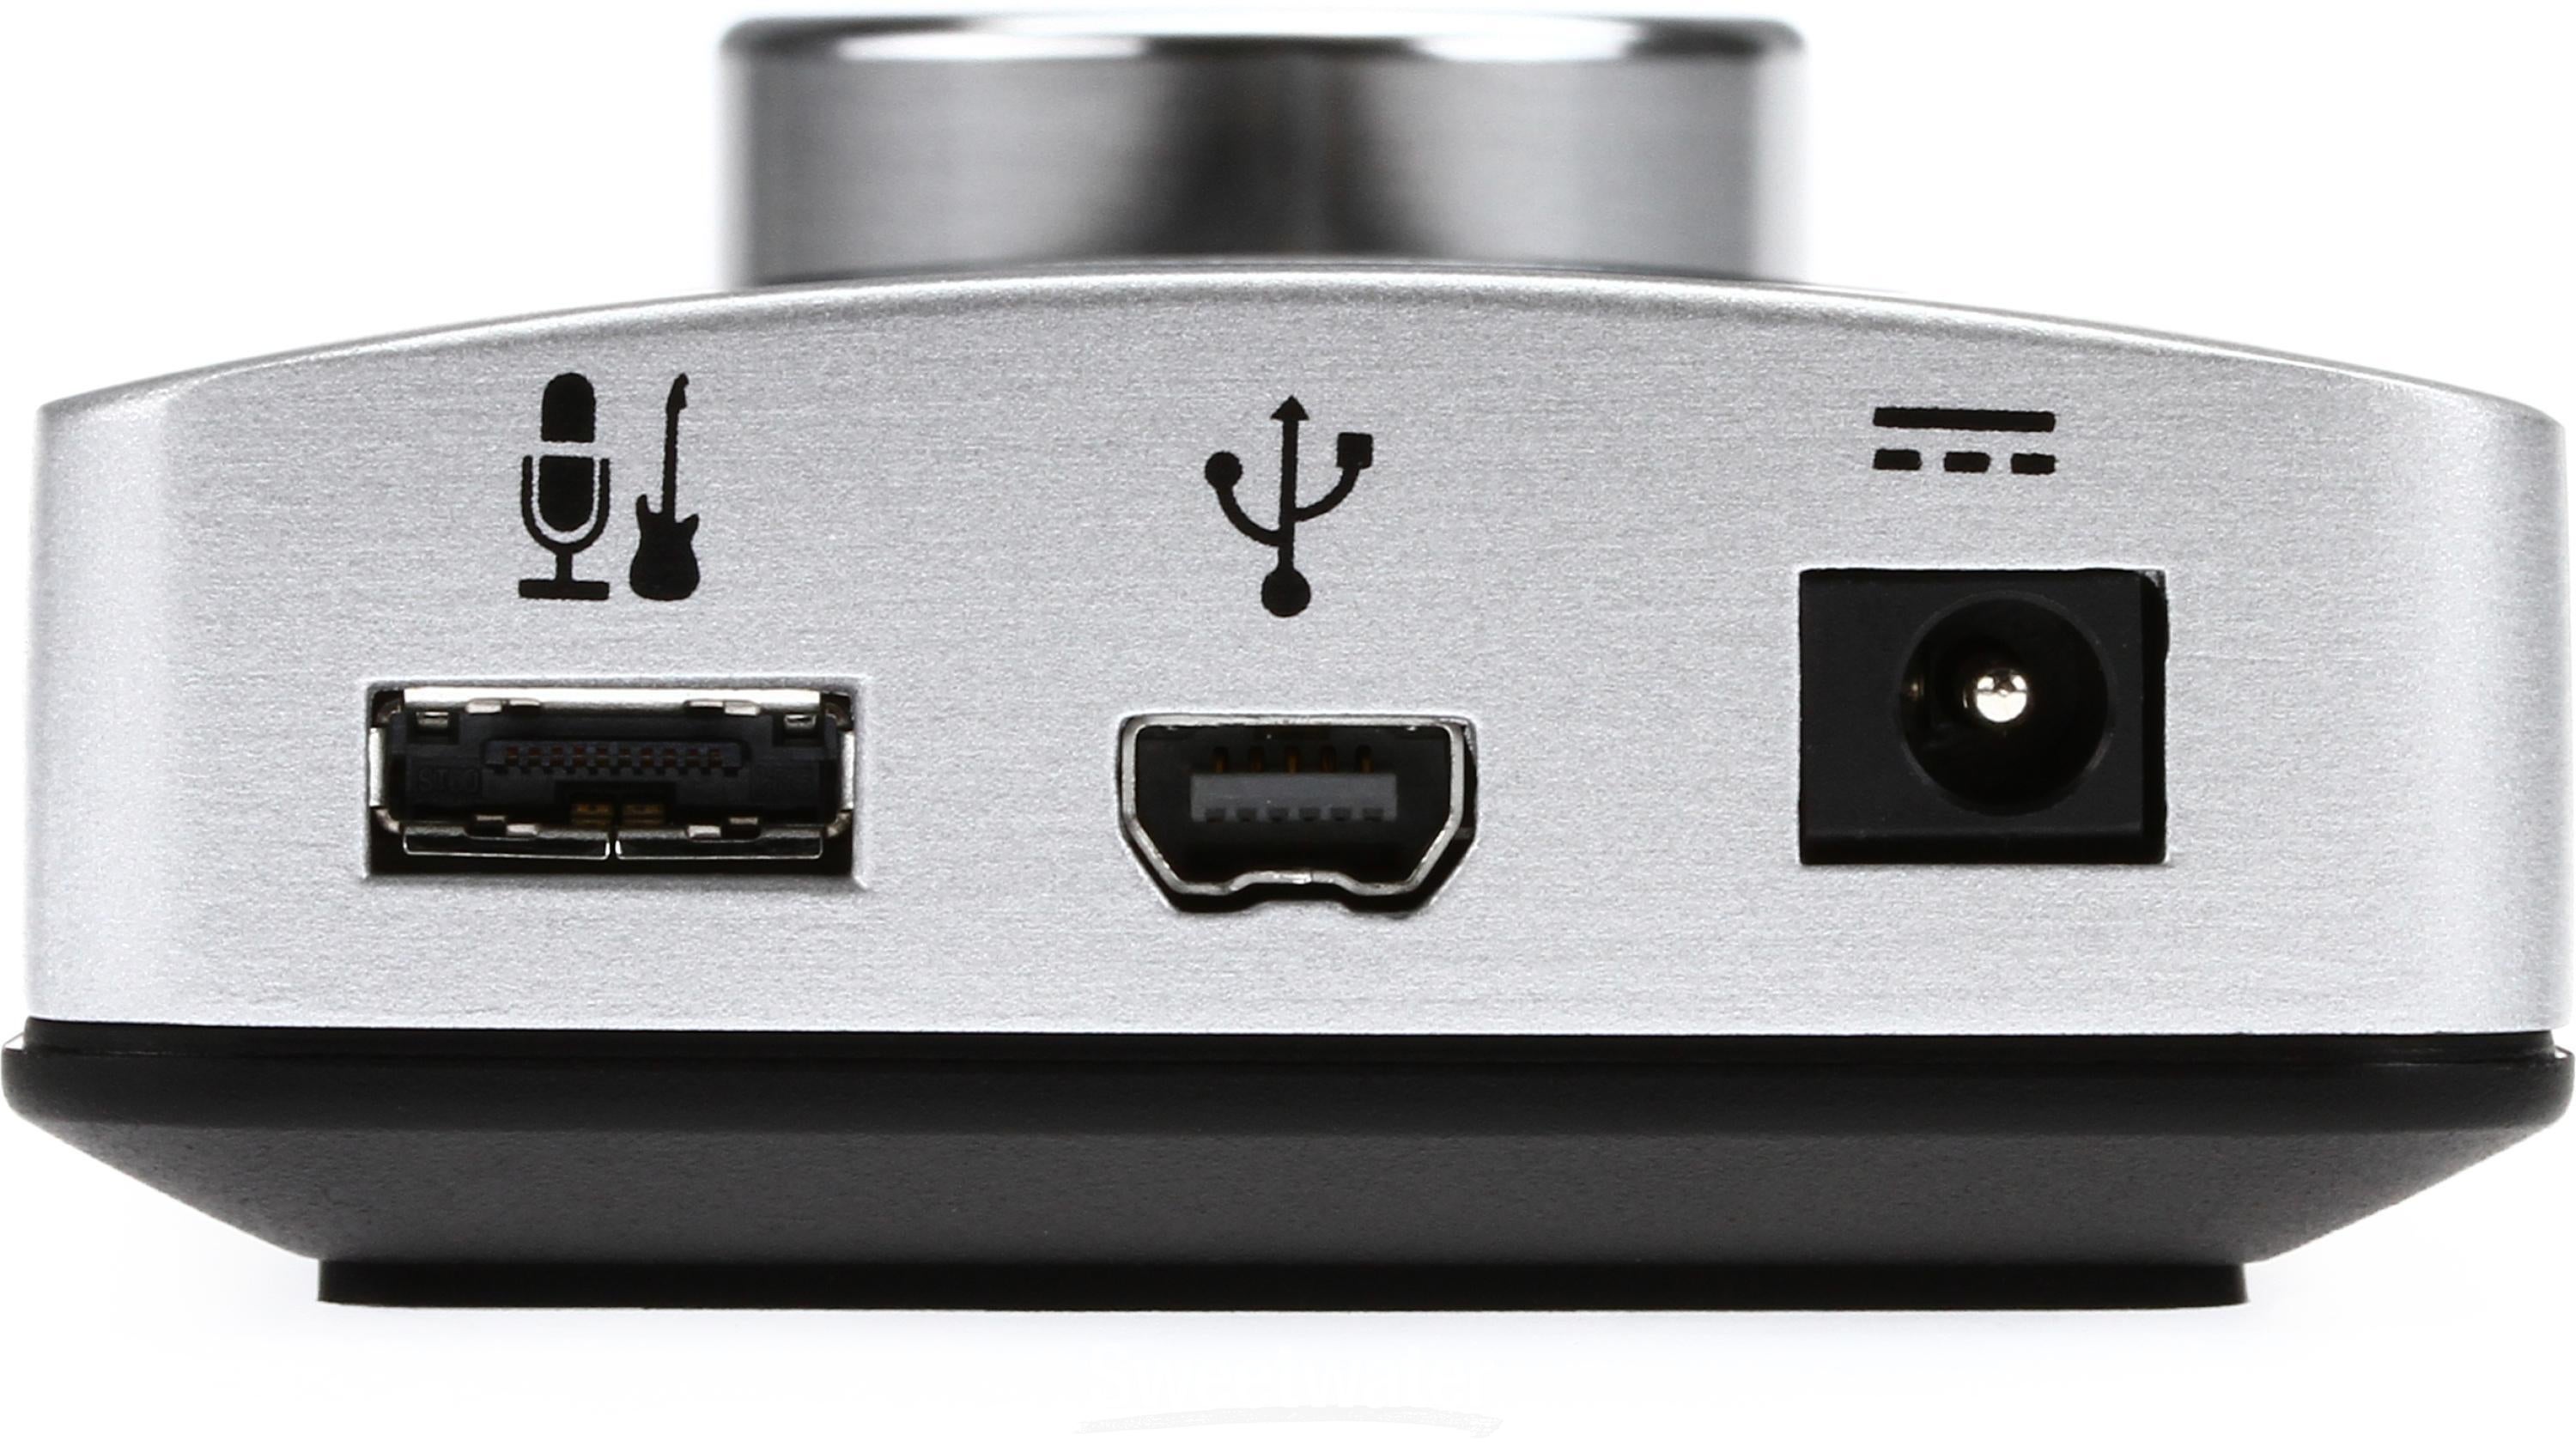 Apogee One 2-channel USB Audio Interface | Sweetwater